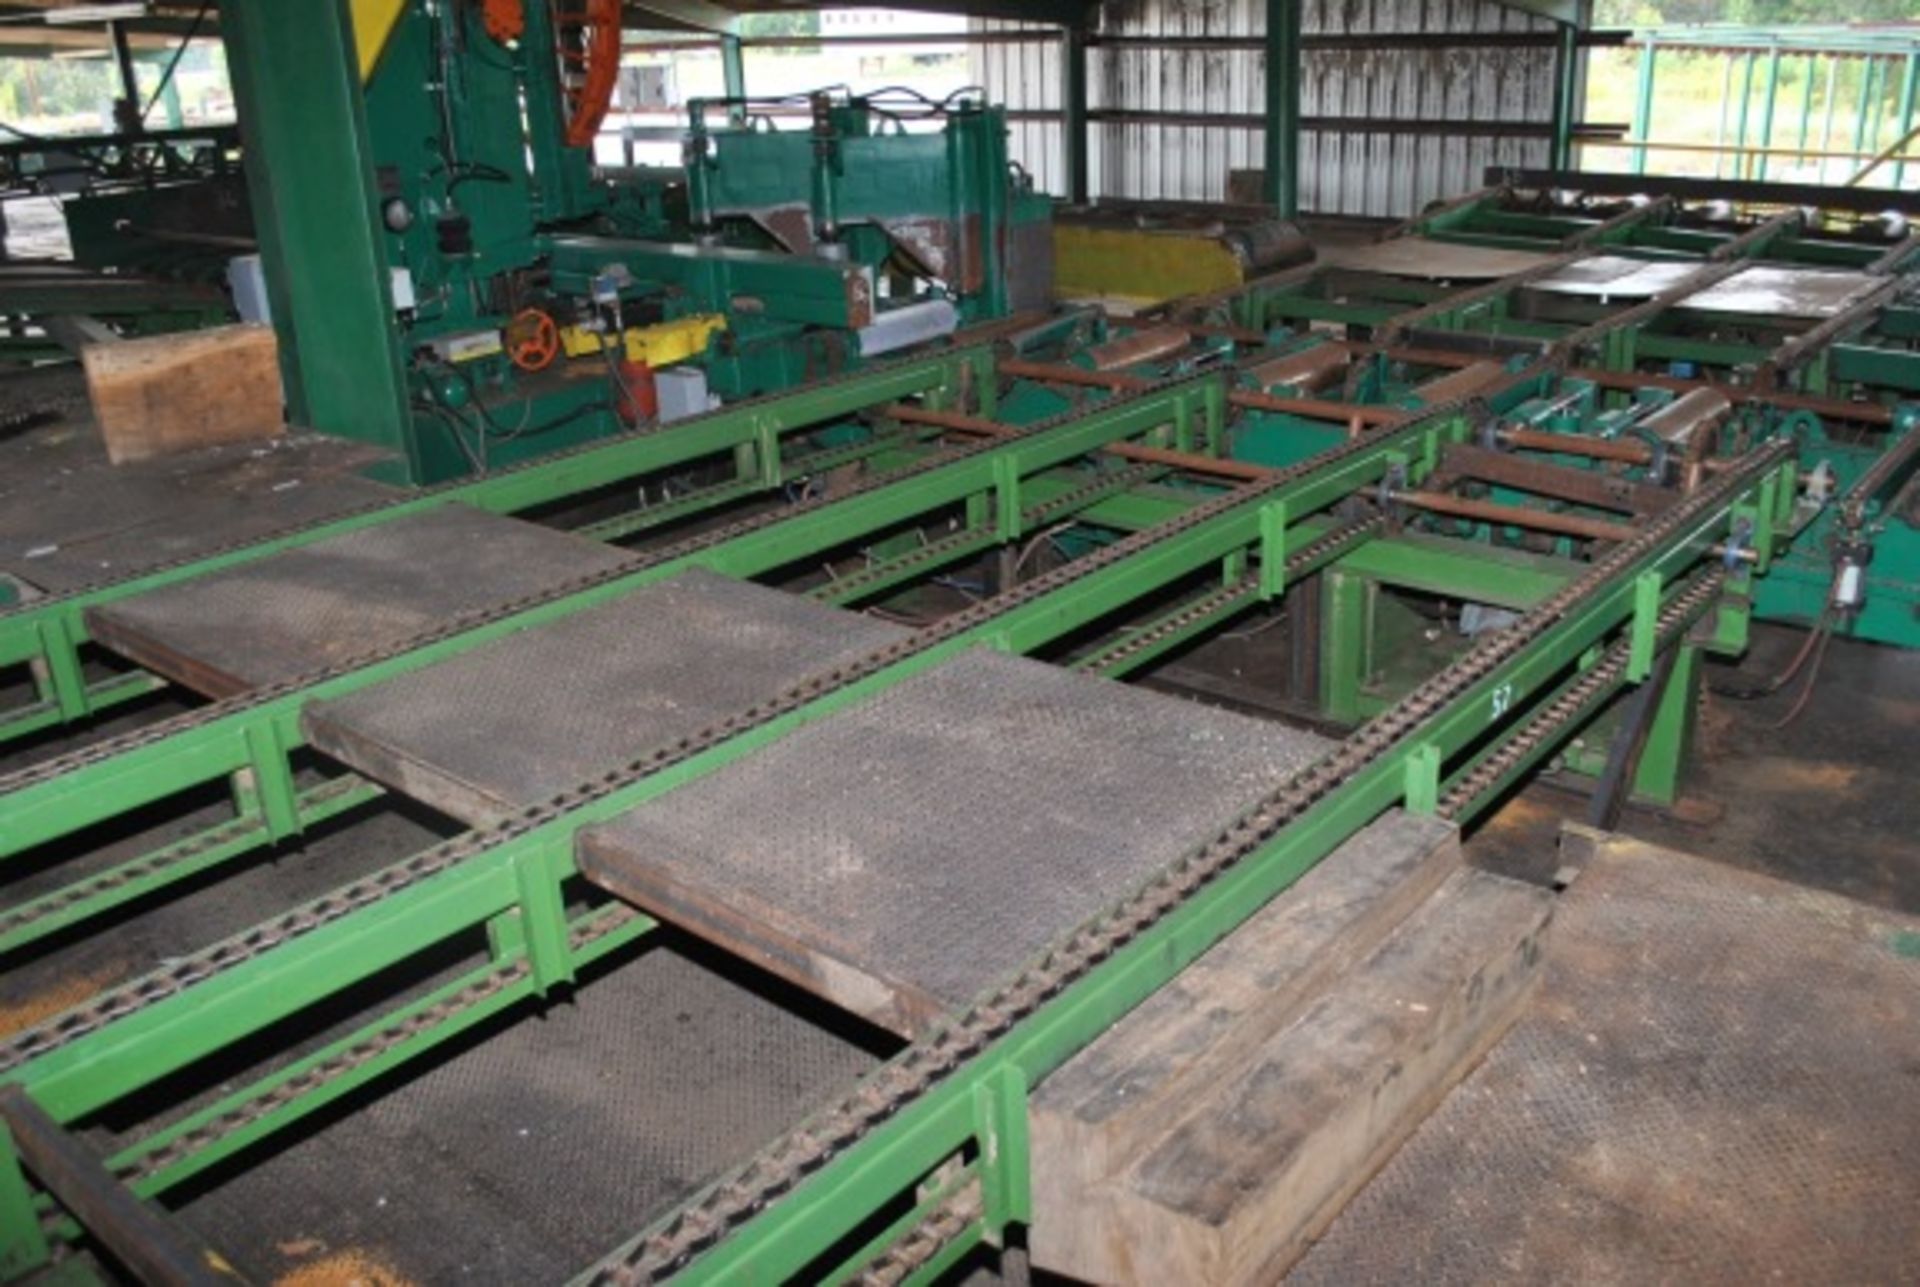 TRANSFER DECK FROM MILL, 20' 4 STRAND W/78 CHAIN; W/DRIVE MOTOR; NO GEAR DRIVE - Image 3 of 3